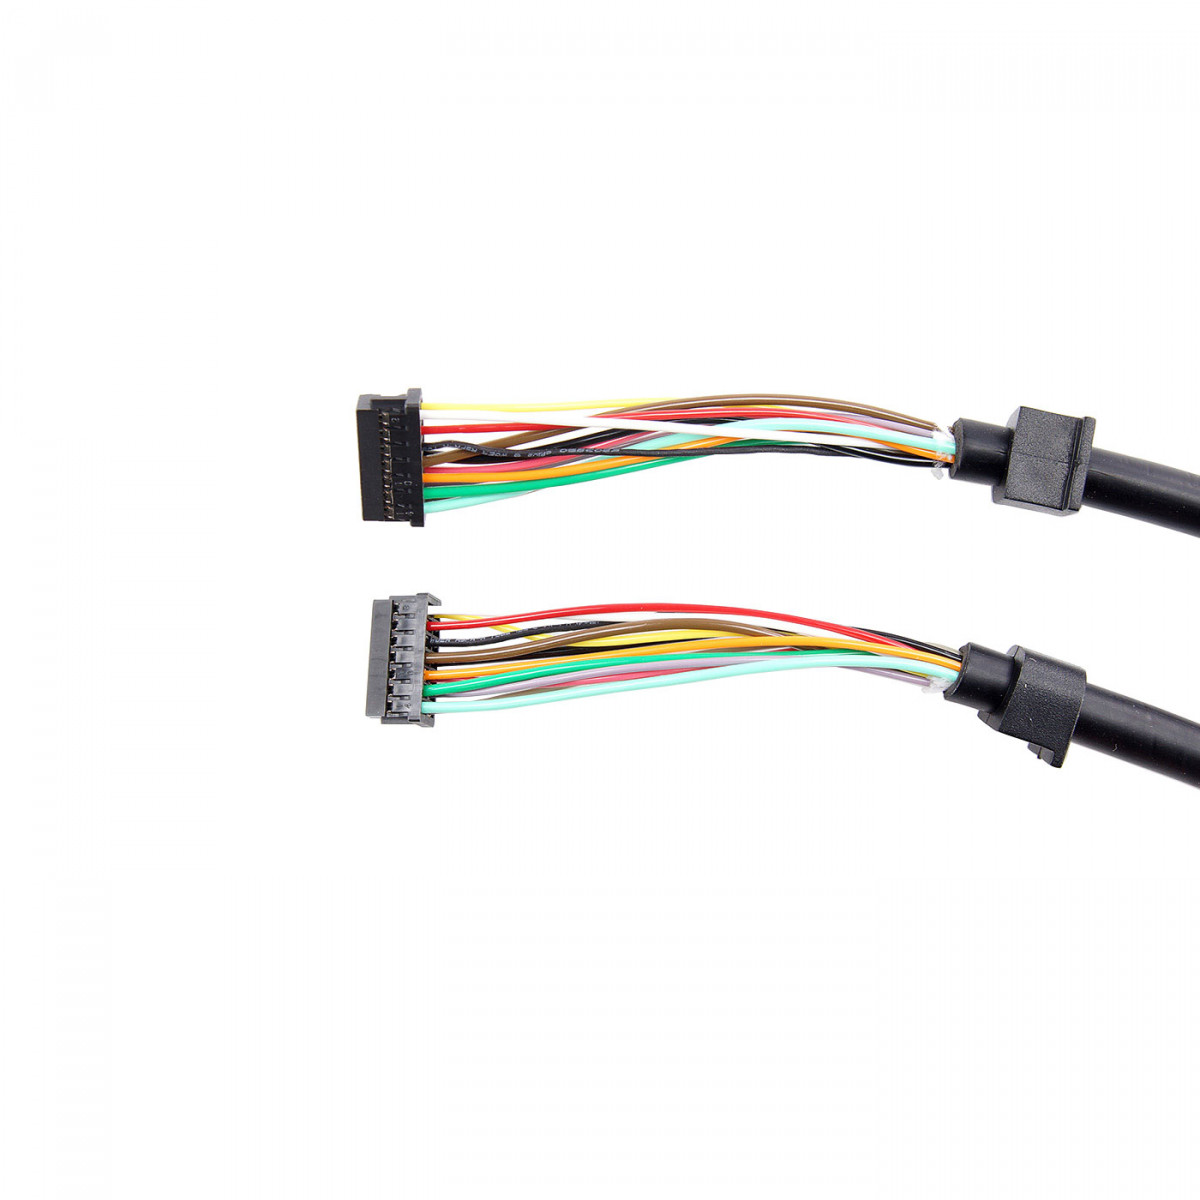 SEPURA 3m connection cable, for remote mounting of the vehicle charging cradle of the STP8X ATEX 300-00980